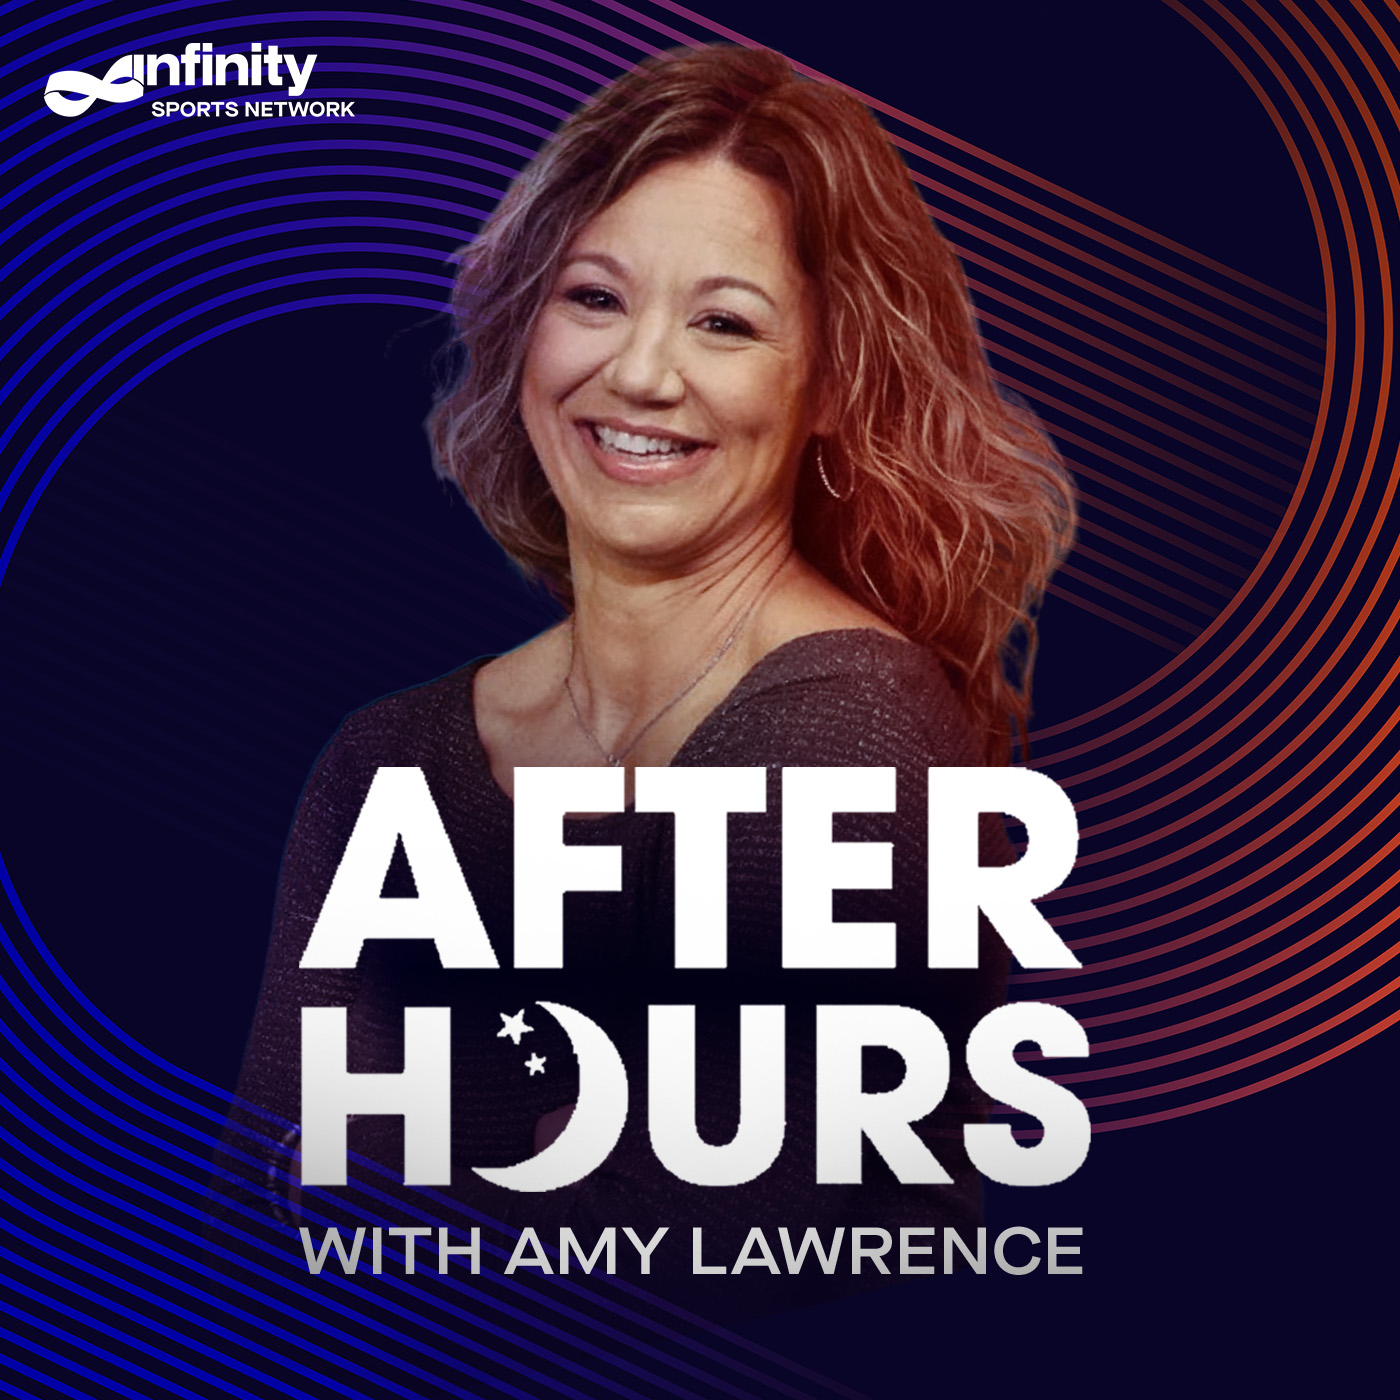 12-28-21 After Hours with Amy Lawrence PODCAST: Hour 3